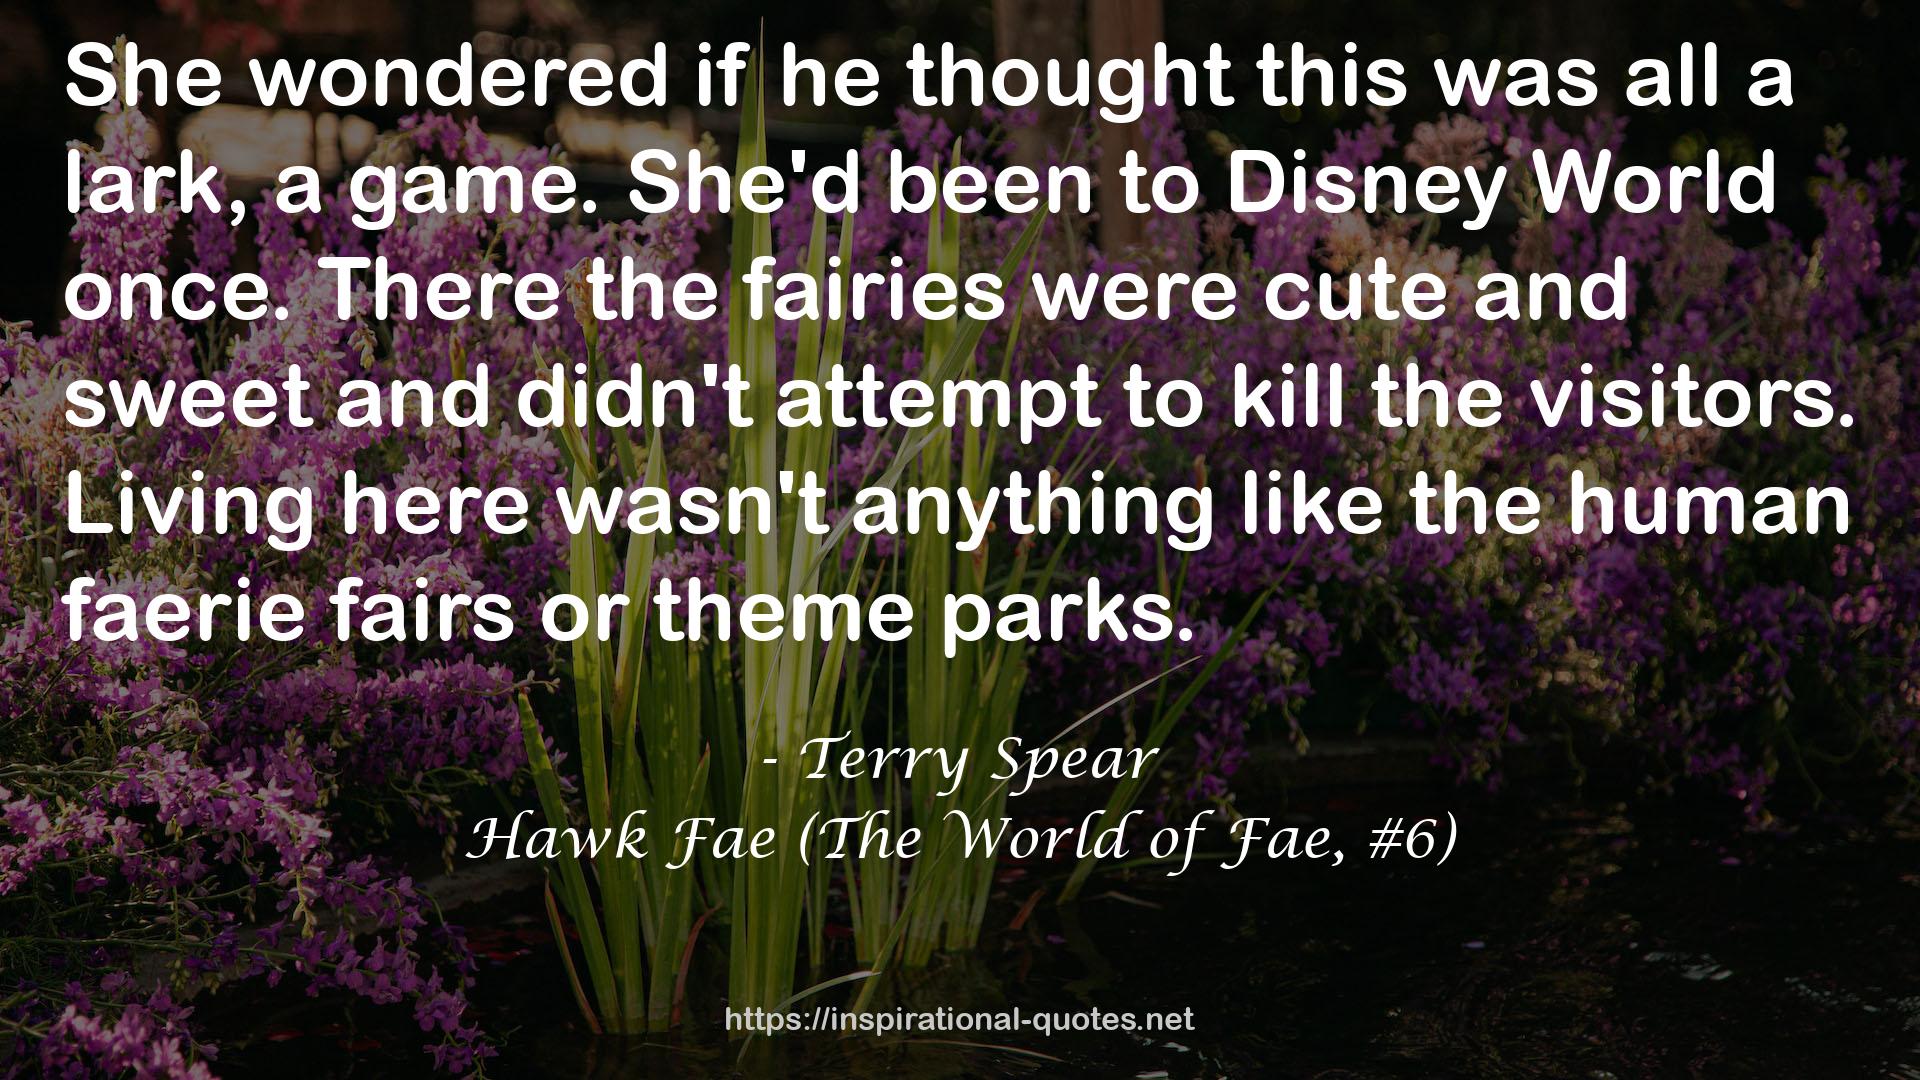 the human faerie fairs  QUOTES